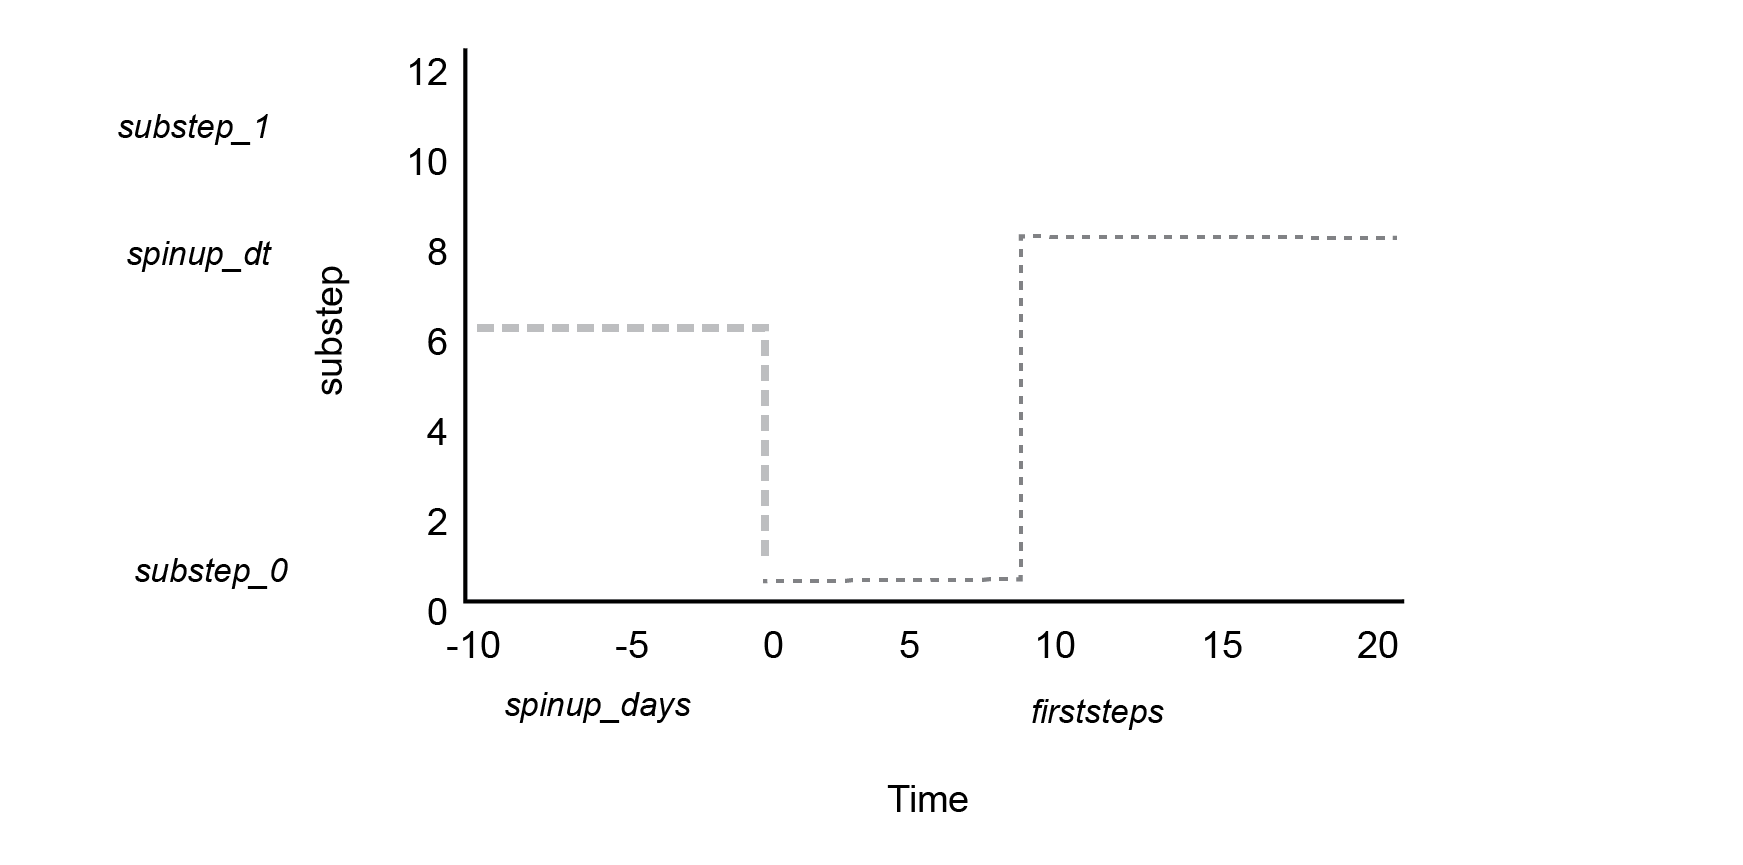 Schematic of the timestep over time. The initial period up to `spinup_days` occurs in 'negative time', at a duration of `spinup_dt`.